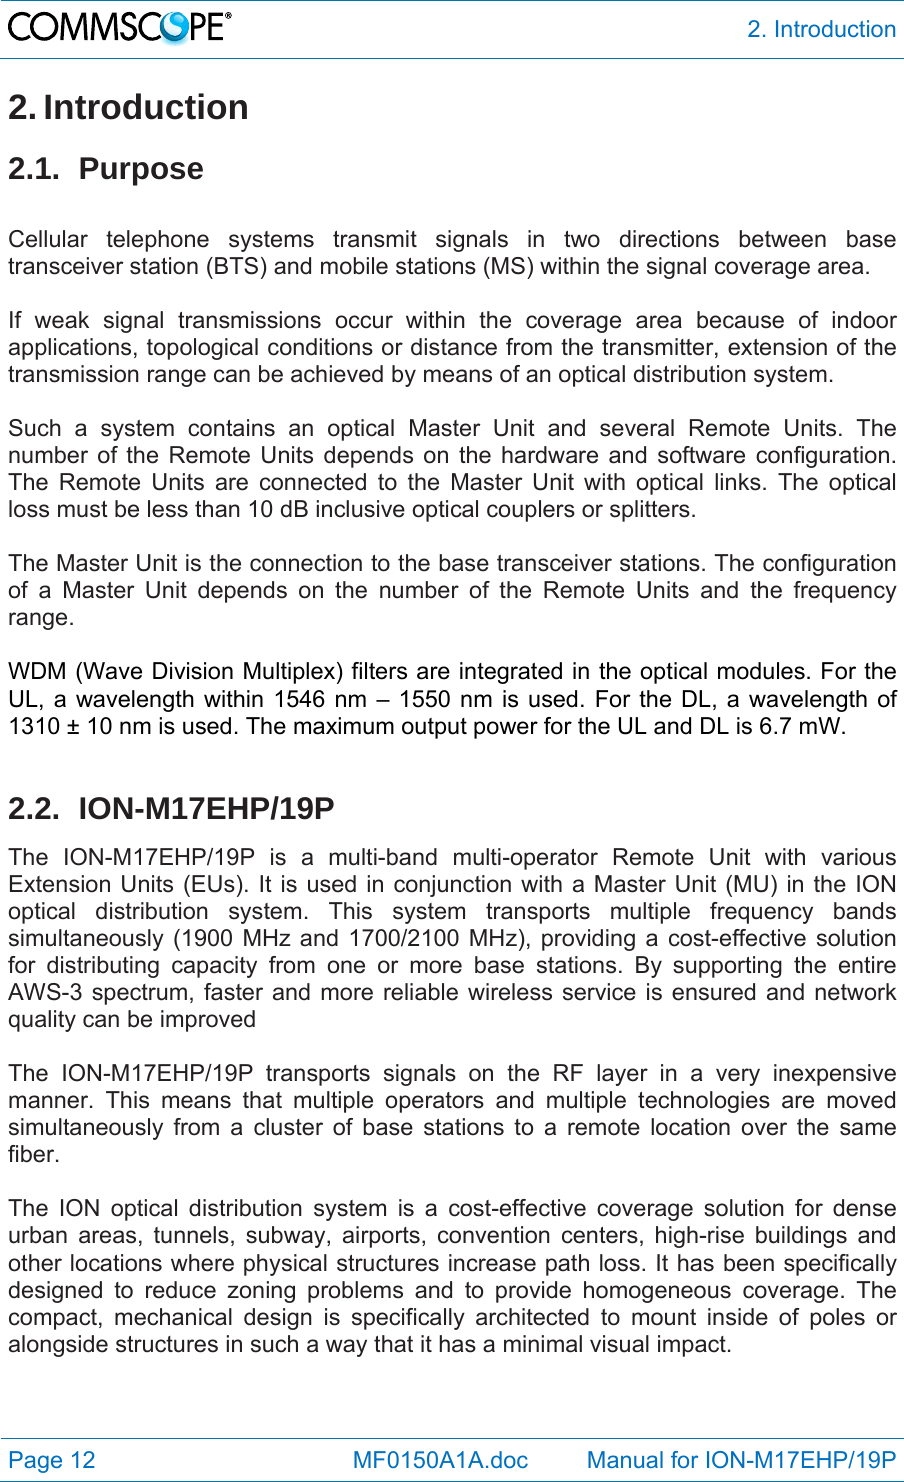  2. Introduction Page 12            MF0150A1A.doc         Manual for ION-M17EHP/19P 2. Introduction 2.1. Purpose  Cellular telephone systems transmit signals in two directions between base transceiver station (BTS) and mobile stations (MS) within the signal coverage area.  If weak signal transmissions occur within the coverage area because of indoor applications, topological conditions or distance from the transmitter, extension of the transmission range can be achieved by means of an optical distribution system.  Such a system contains an optical Master Unit and several Remote Units. The number of the Remote Units depends on the hardware and software configuration. The Remote Units are connected to the Master Unit with optical links. The optical loss must be less than 10 dB inclusive optical couplers or splitters.  The Master Unit is the connection to the base transceiver stations. The configuration of a Master Unit depends on the number of the Remote Units and the frequency range.   WDM (Wave Division Multiplex) filters are integrated in the optical modules. For the UL, a wavelength within 1546 nm – 1550 nm is used. For the DL, a wavelength of 1310 ± 10 nm is used. The maximum output power for the UL and DL is 6.7 mW.  2.2. ION-M17EHP/19P The ION-M17EHP/19P is a multi-band multi-operator Remote Unit with various Extension Units (EUs). It is used in conjunction with a Master Unit (MU) in the ION optical distribution system. This system transports multiple frequency bands simultaneously (1900 MHz and 1700/2100 MHz), providing a cost-effective solution for distributing capacity from one or more base stations. By supporting the entire AWS-3 spectrum, faster and more reliable wireless service is ensured and network quality can be improved  The ION-M17EHP/19P transports signals on the RF layer in a very inexpensive manner. This means that multiple operators and multiple technologies are moved simultaneously from a cluster of base stations to a remote location over the same fiber.  The ION optical distribution system is a cost-effective coverage solution for dense urban areas, tunnels, subway, airports, convention centers, high-rise buildings and other locations where physical structures increase path loss. It has been specifically designed to reduce zoning problems and to provide homogeneous coverage. The compact, mechanical design is specifically architected to mount inside of poles or alongside structures in such a way that it has a minimal visual impact.  